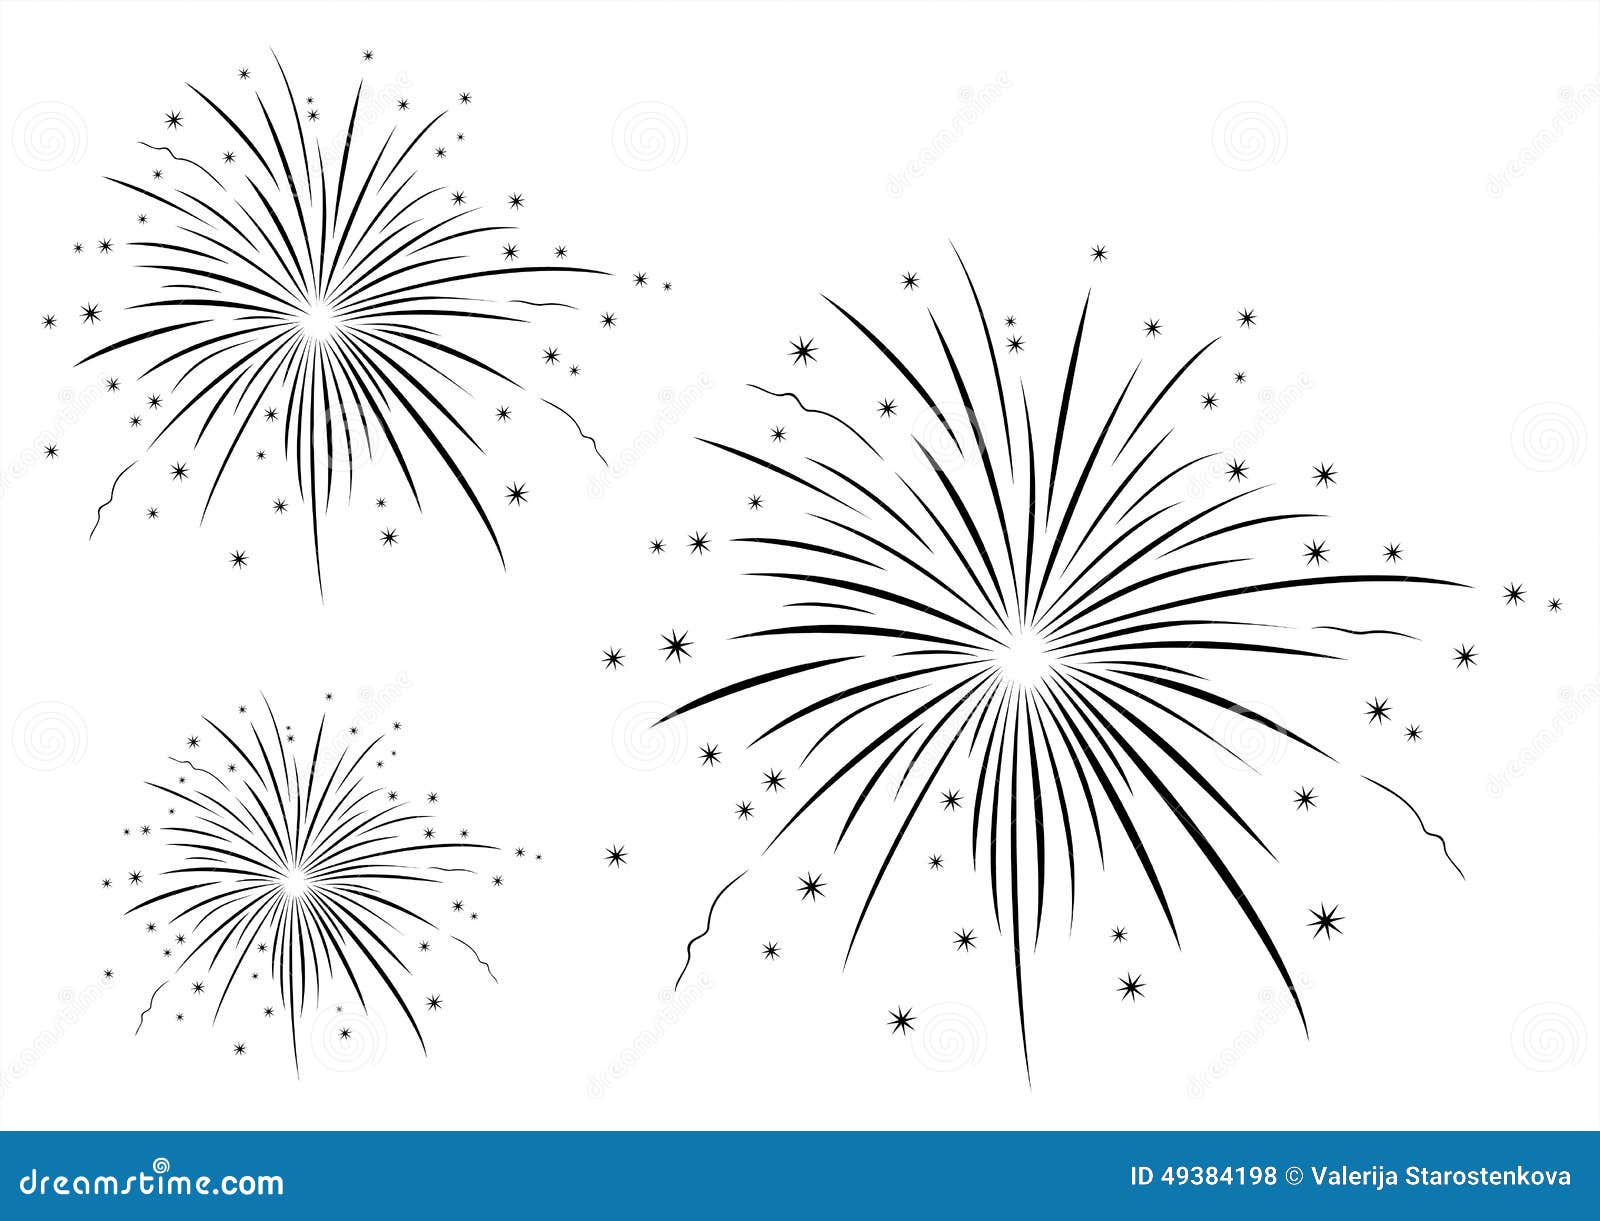 free black and white fireworks clipart - photo #25